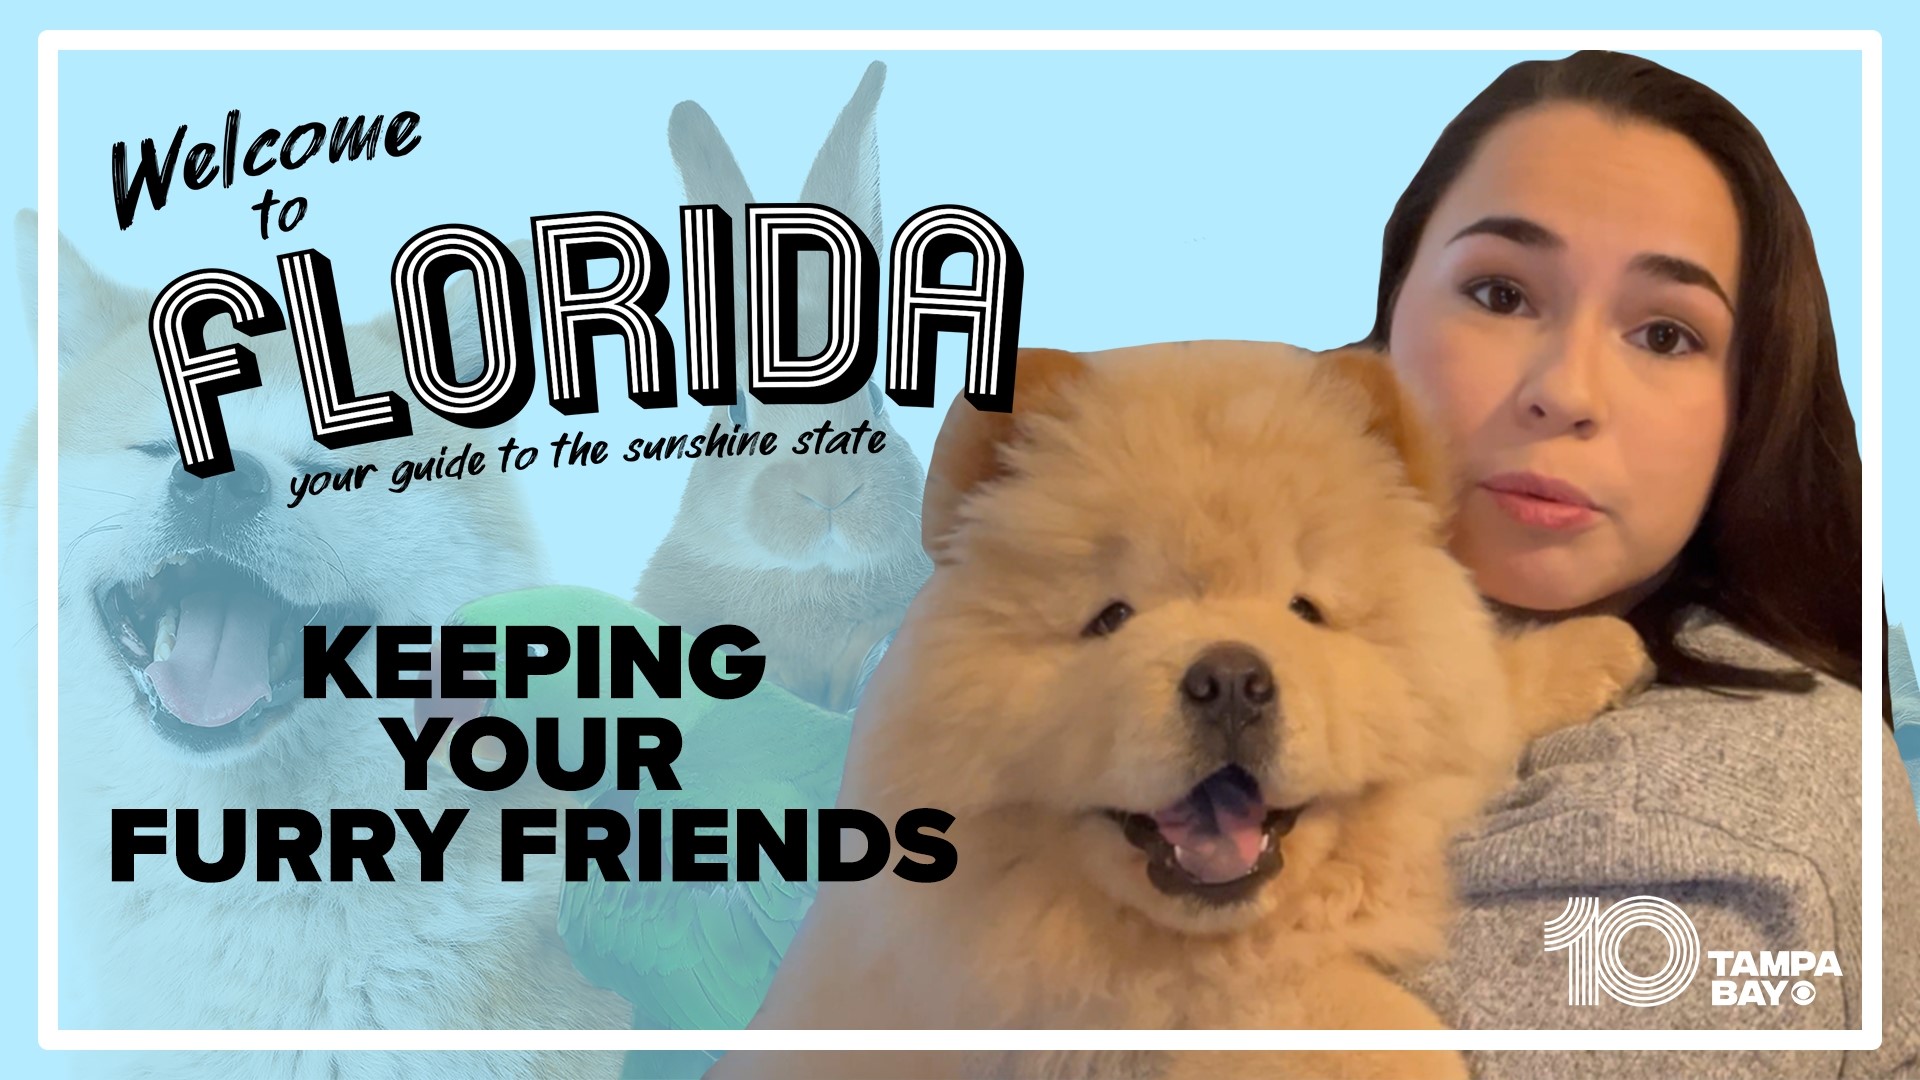 While Florida is considered pet-friendly, there are places and housing that have breed bans and restrictions.